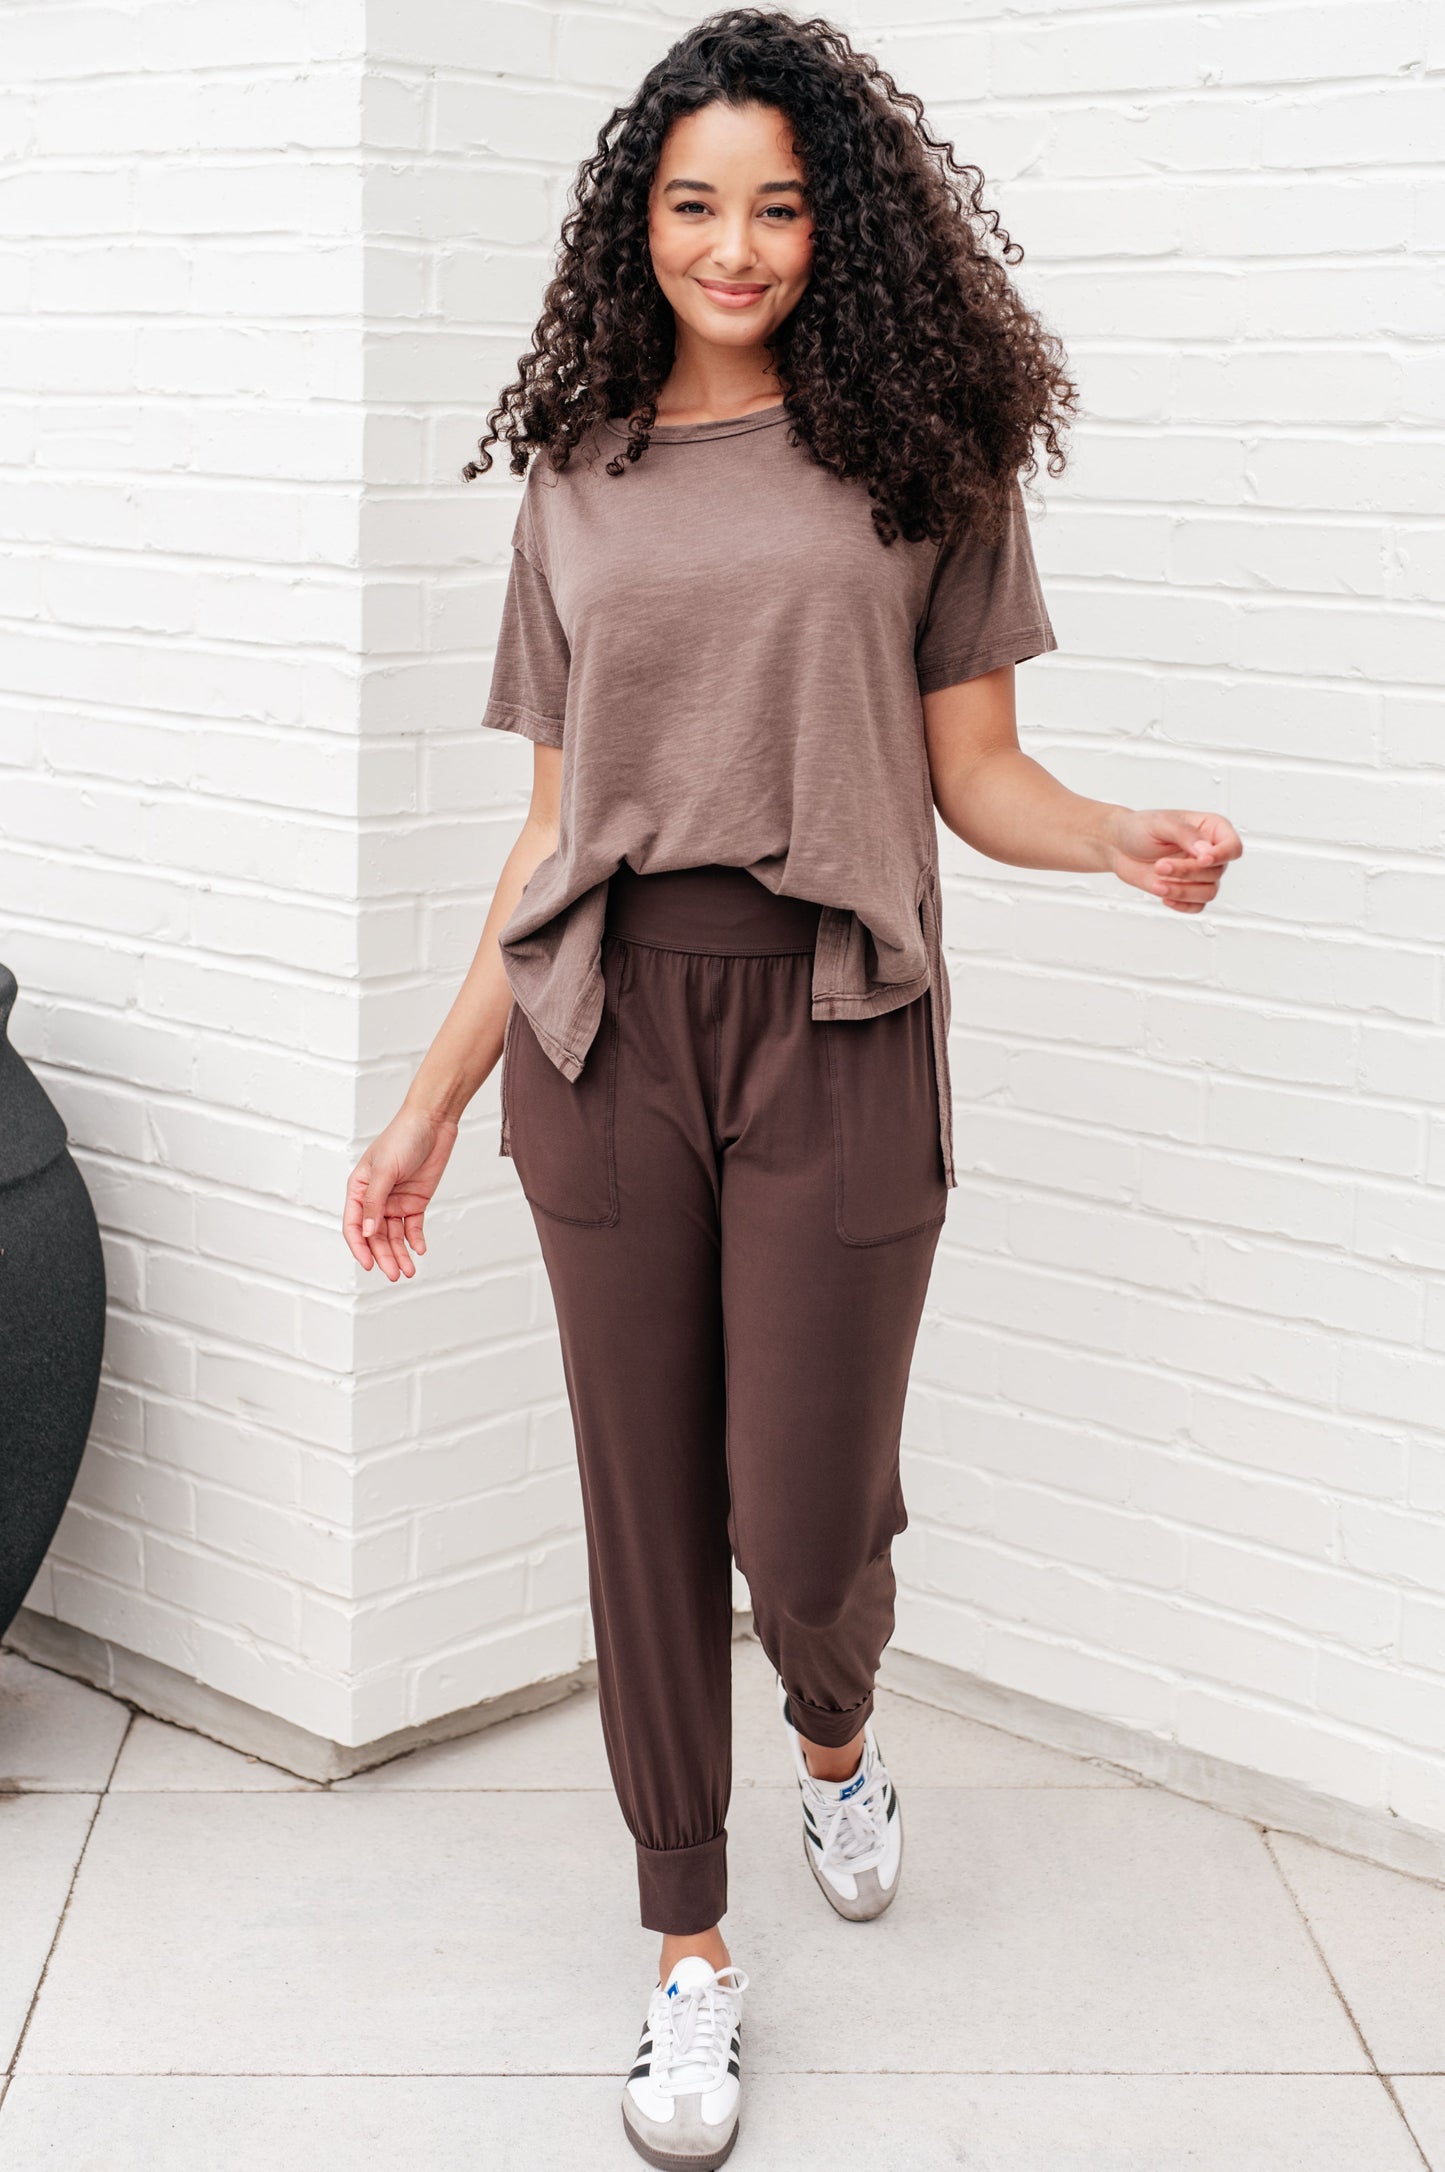 Let Me Live Relaxed Tee in Brown - FamFancy Boutique